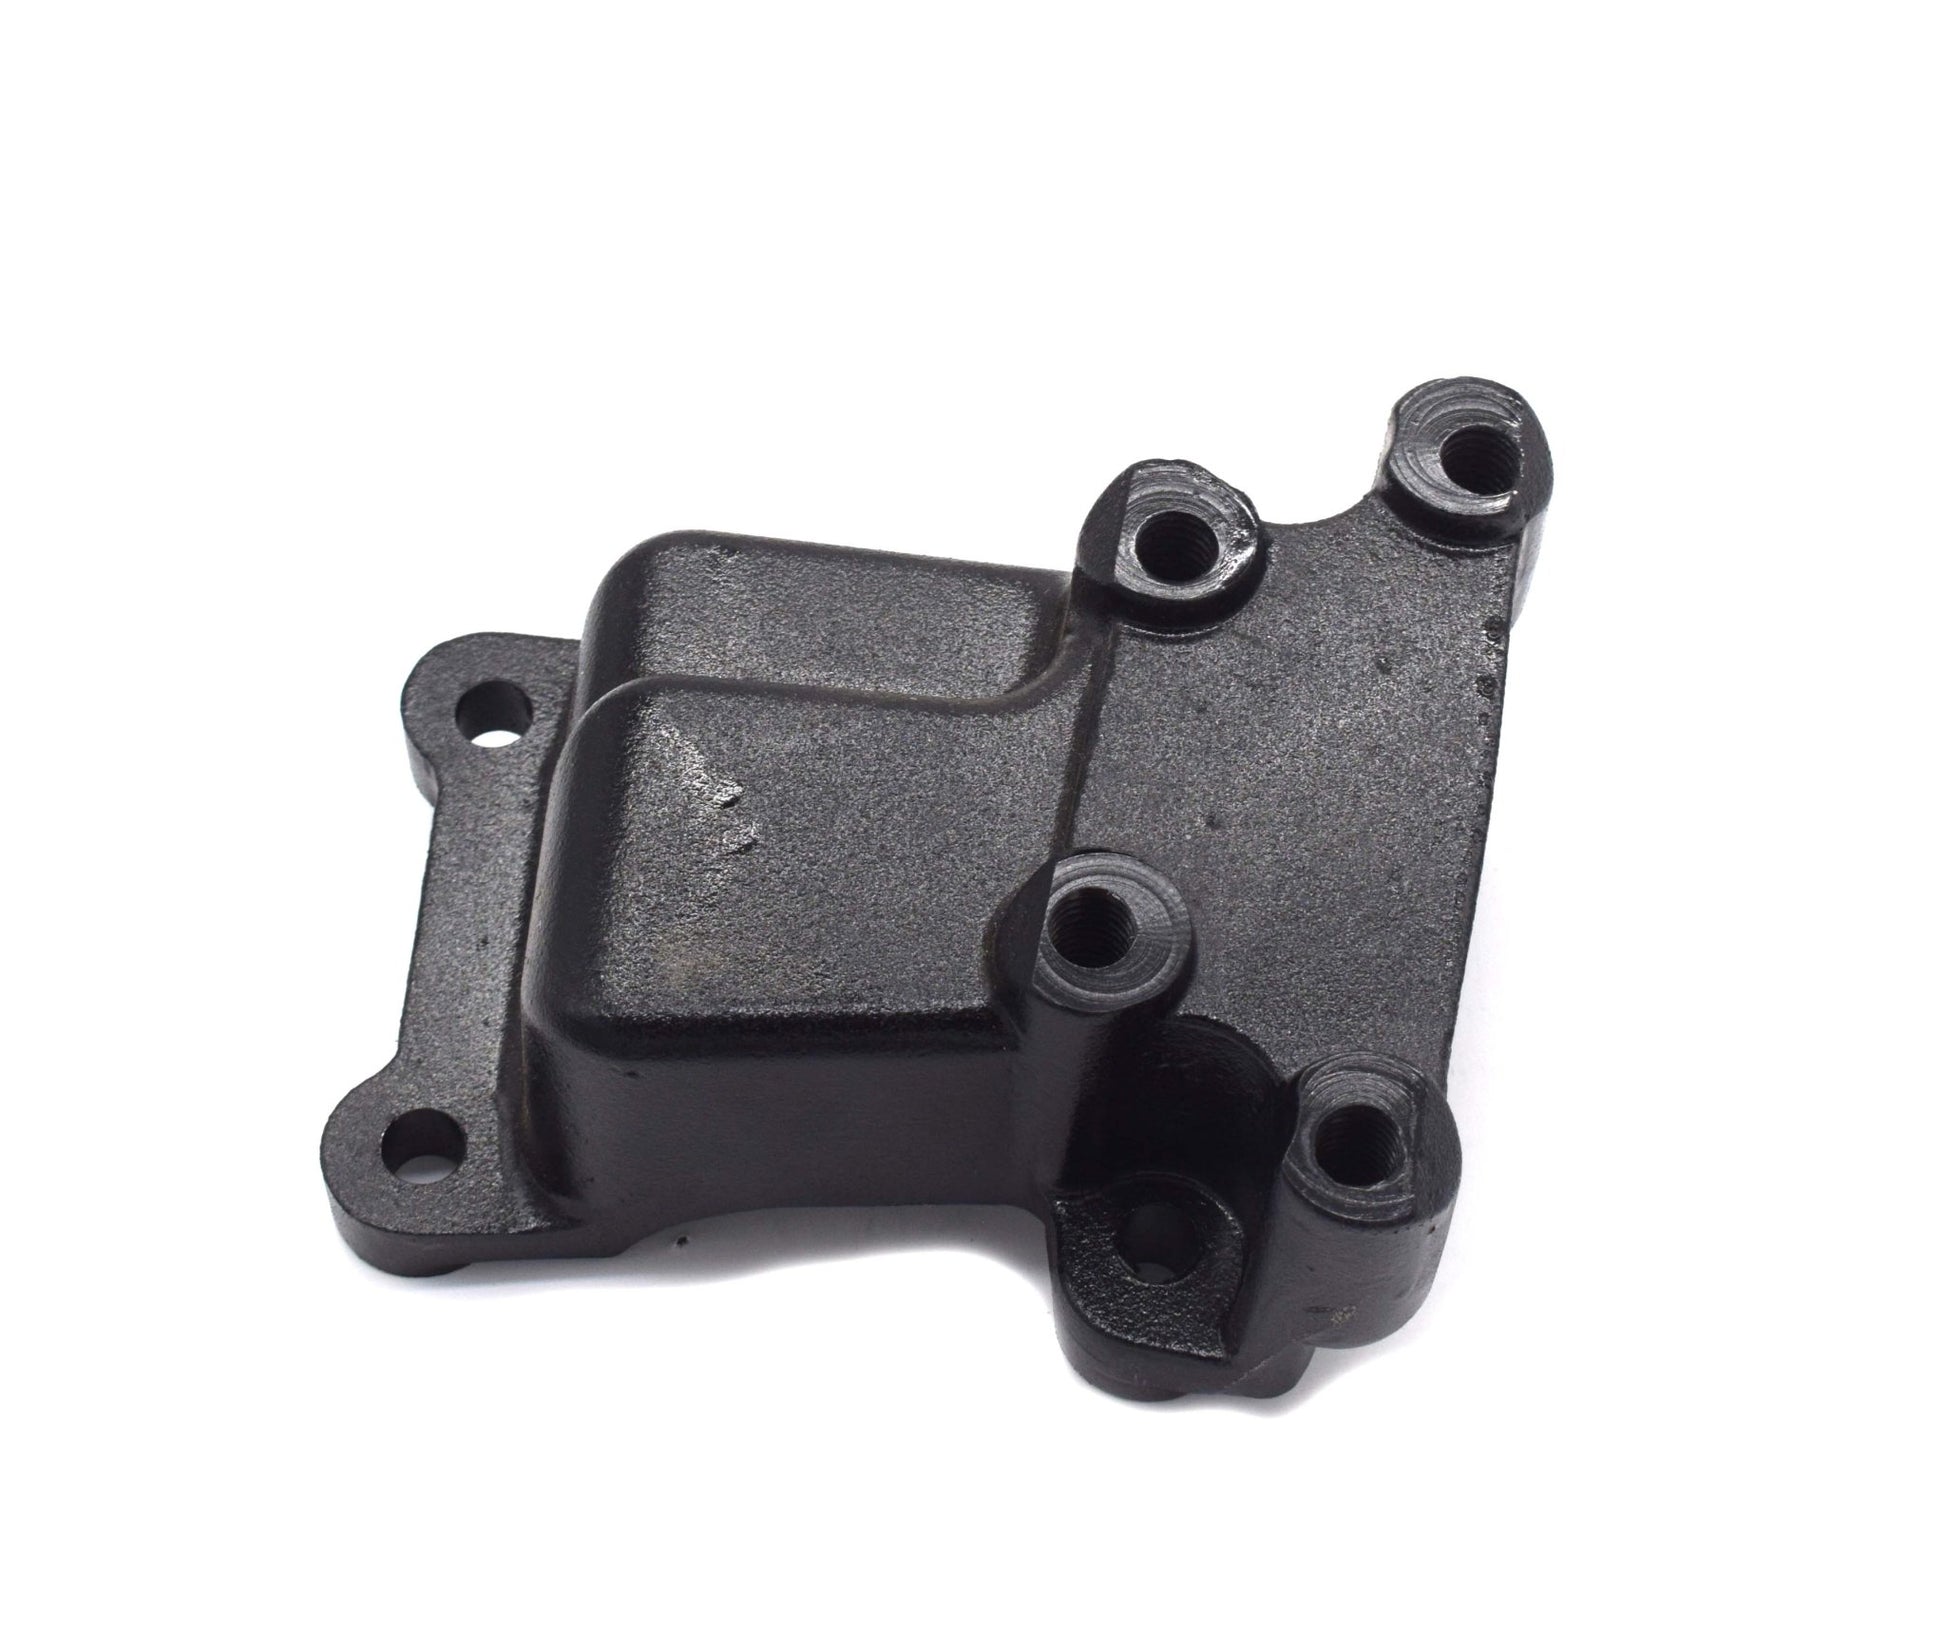 Saginaw Steering Gear Box Bracket, 1941-1971, Jeep and WIllys - The JeepsterMan